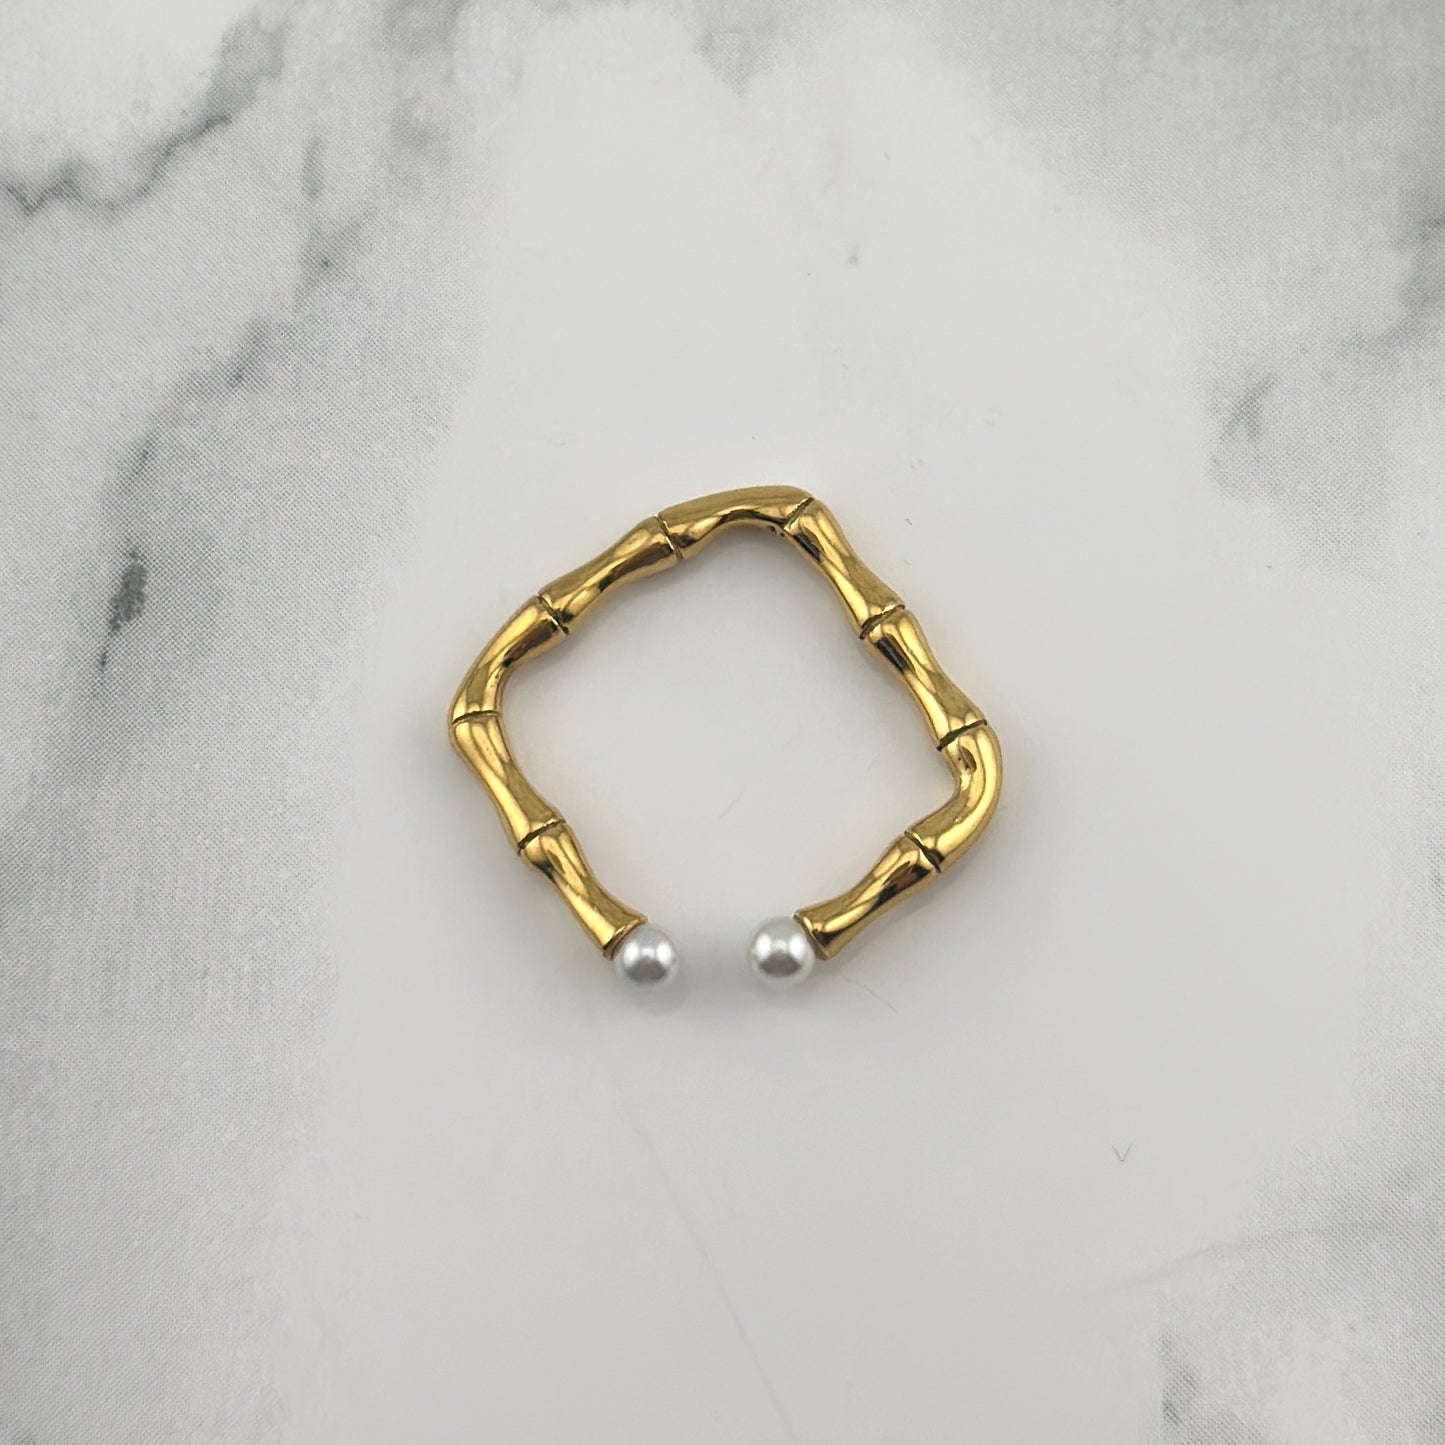 Bamboo Pearl Ring adjustable